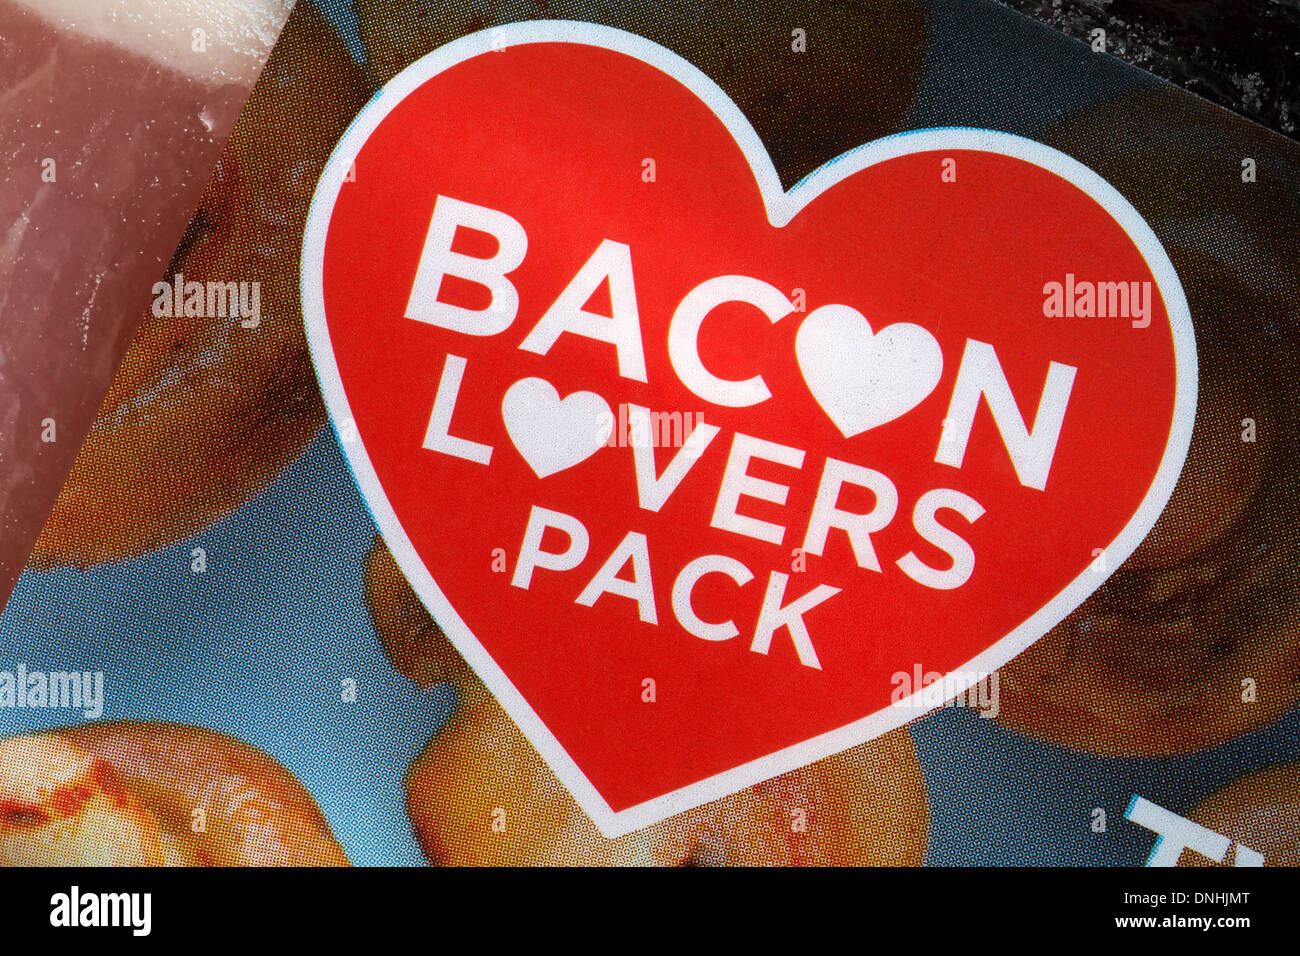 Bacon lovers pack - detail on pack of bacon Stock Photo